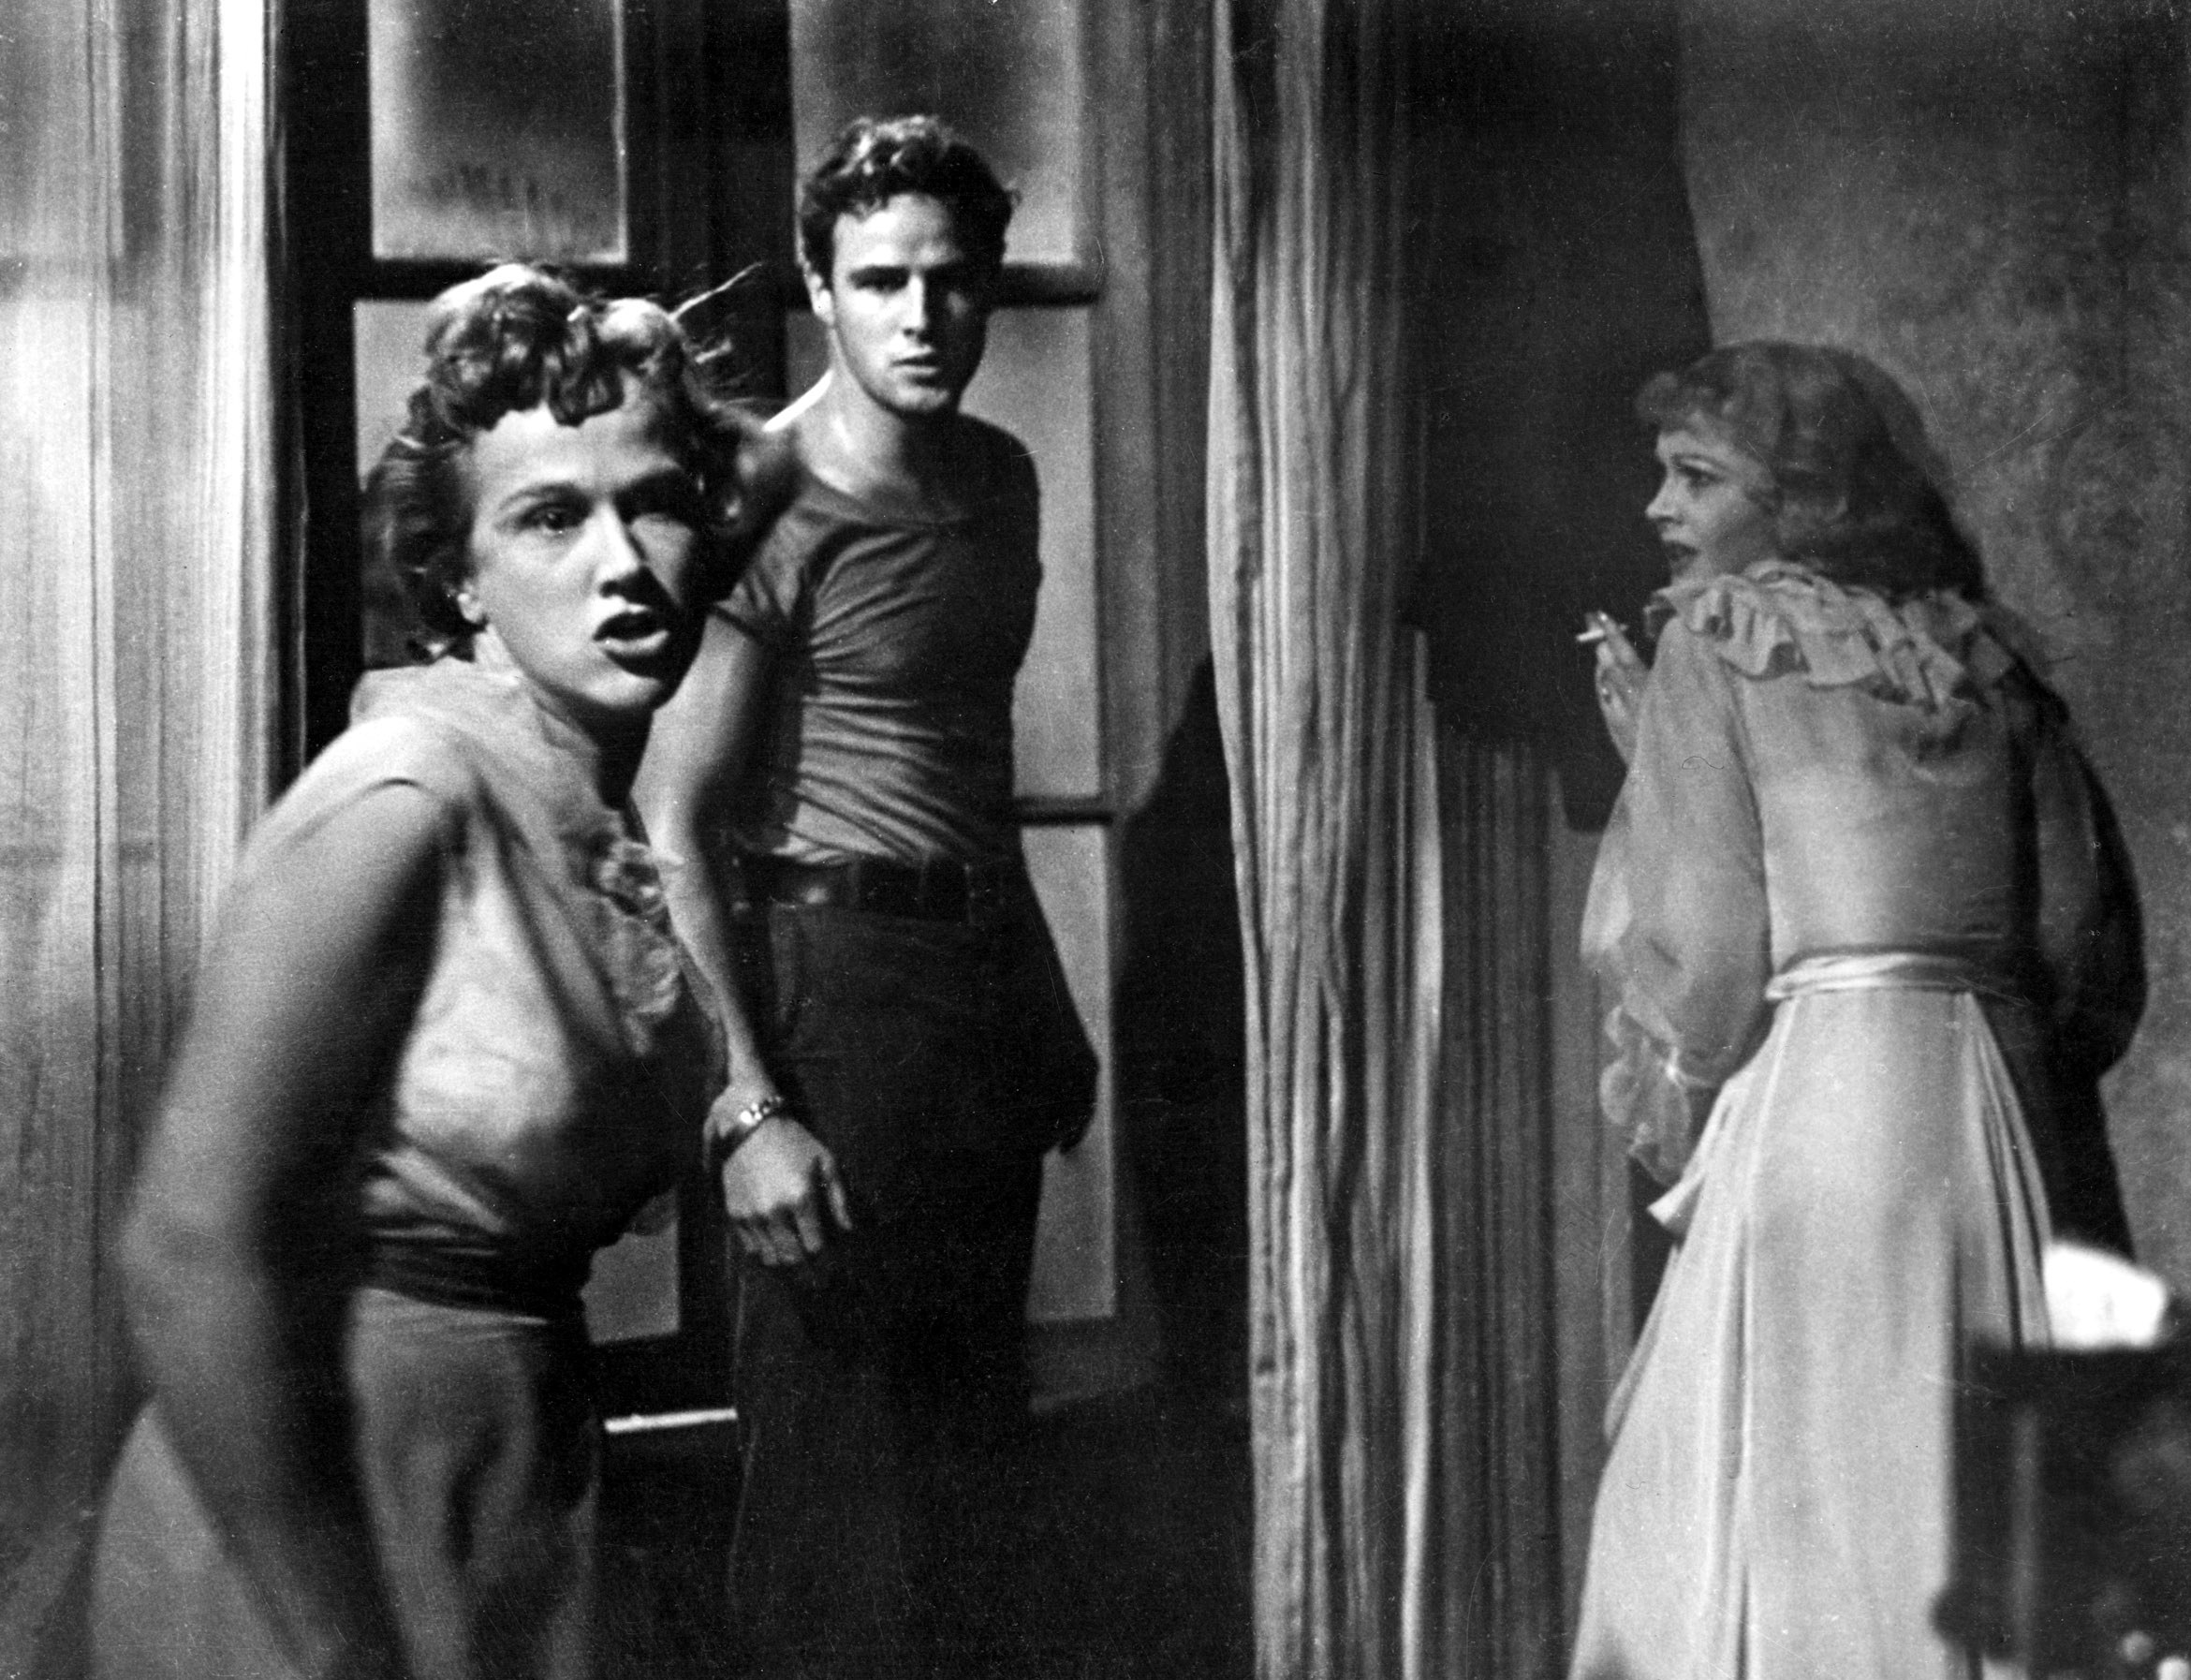 Kim Hunter, Marlon Brando, and Vivien Leigh stand in a room arguing